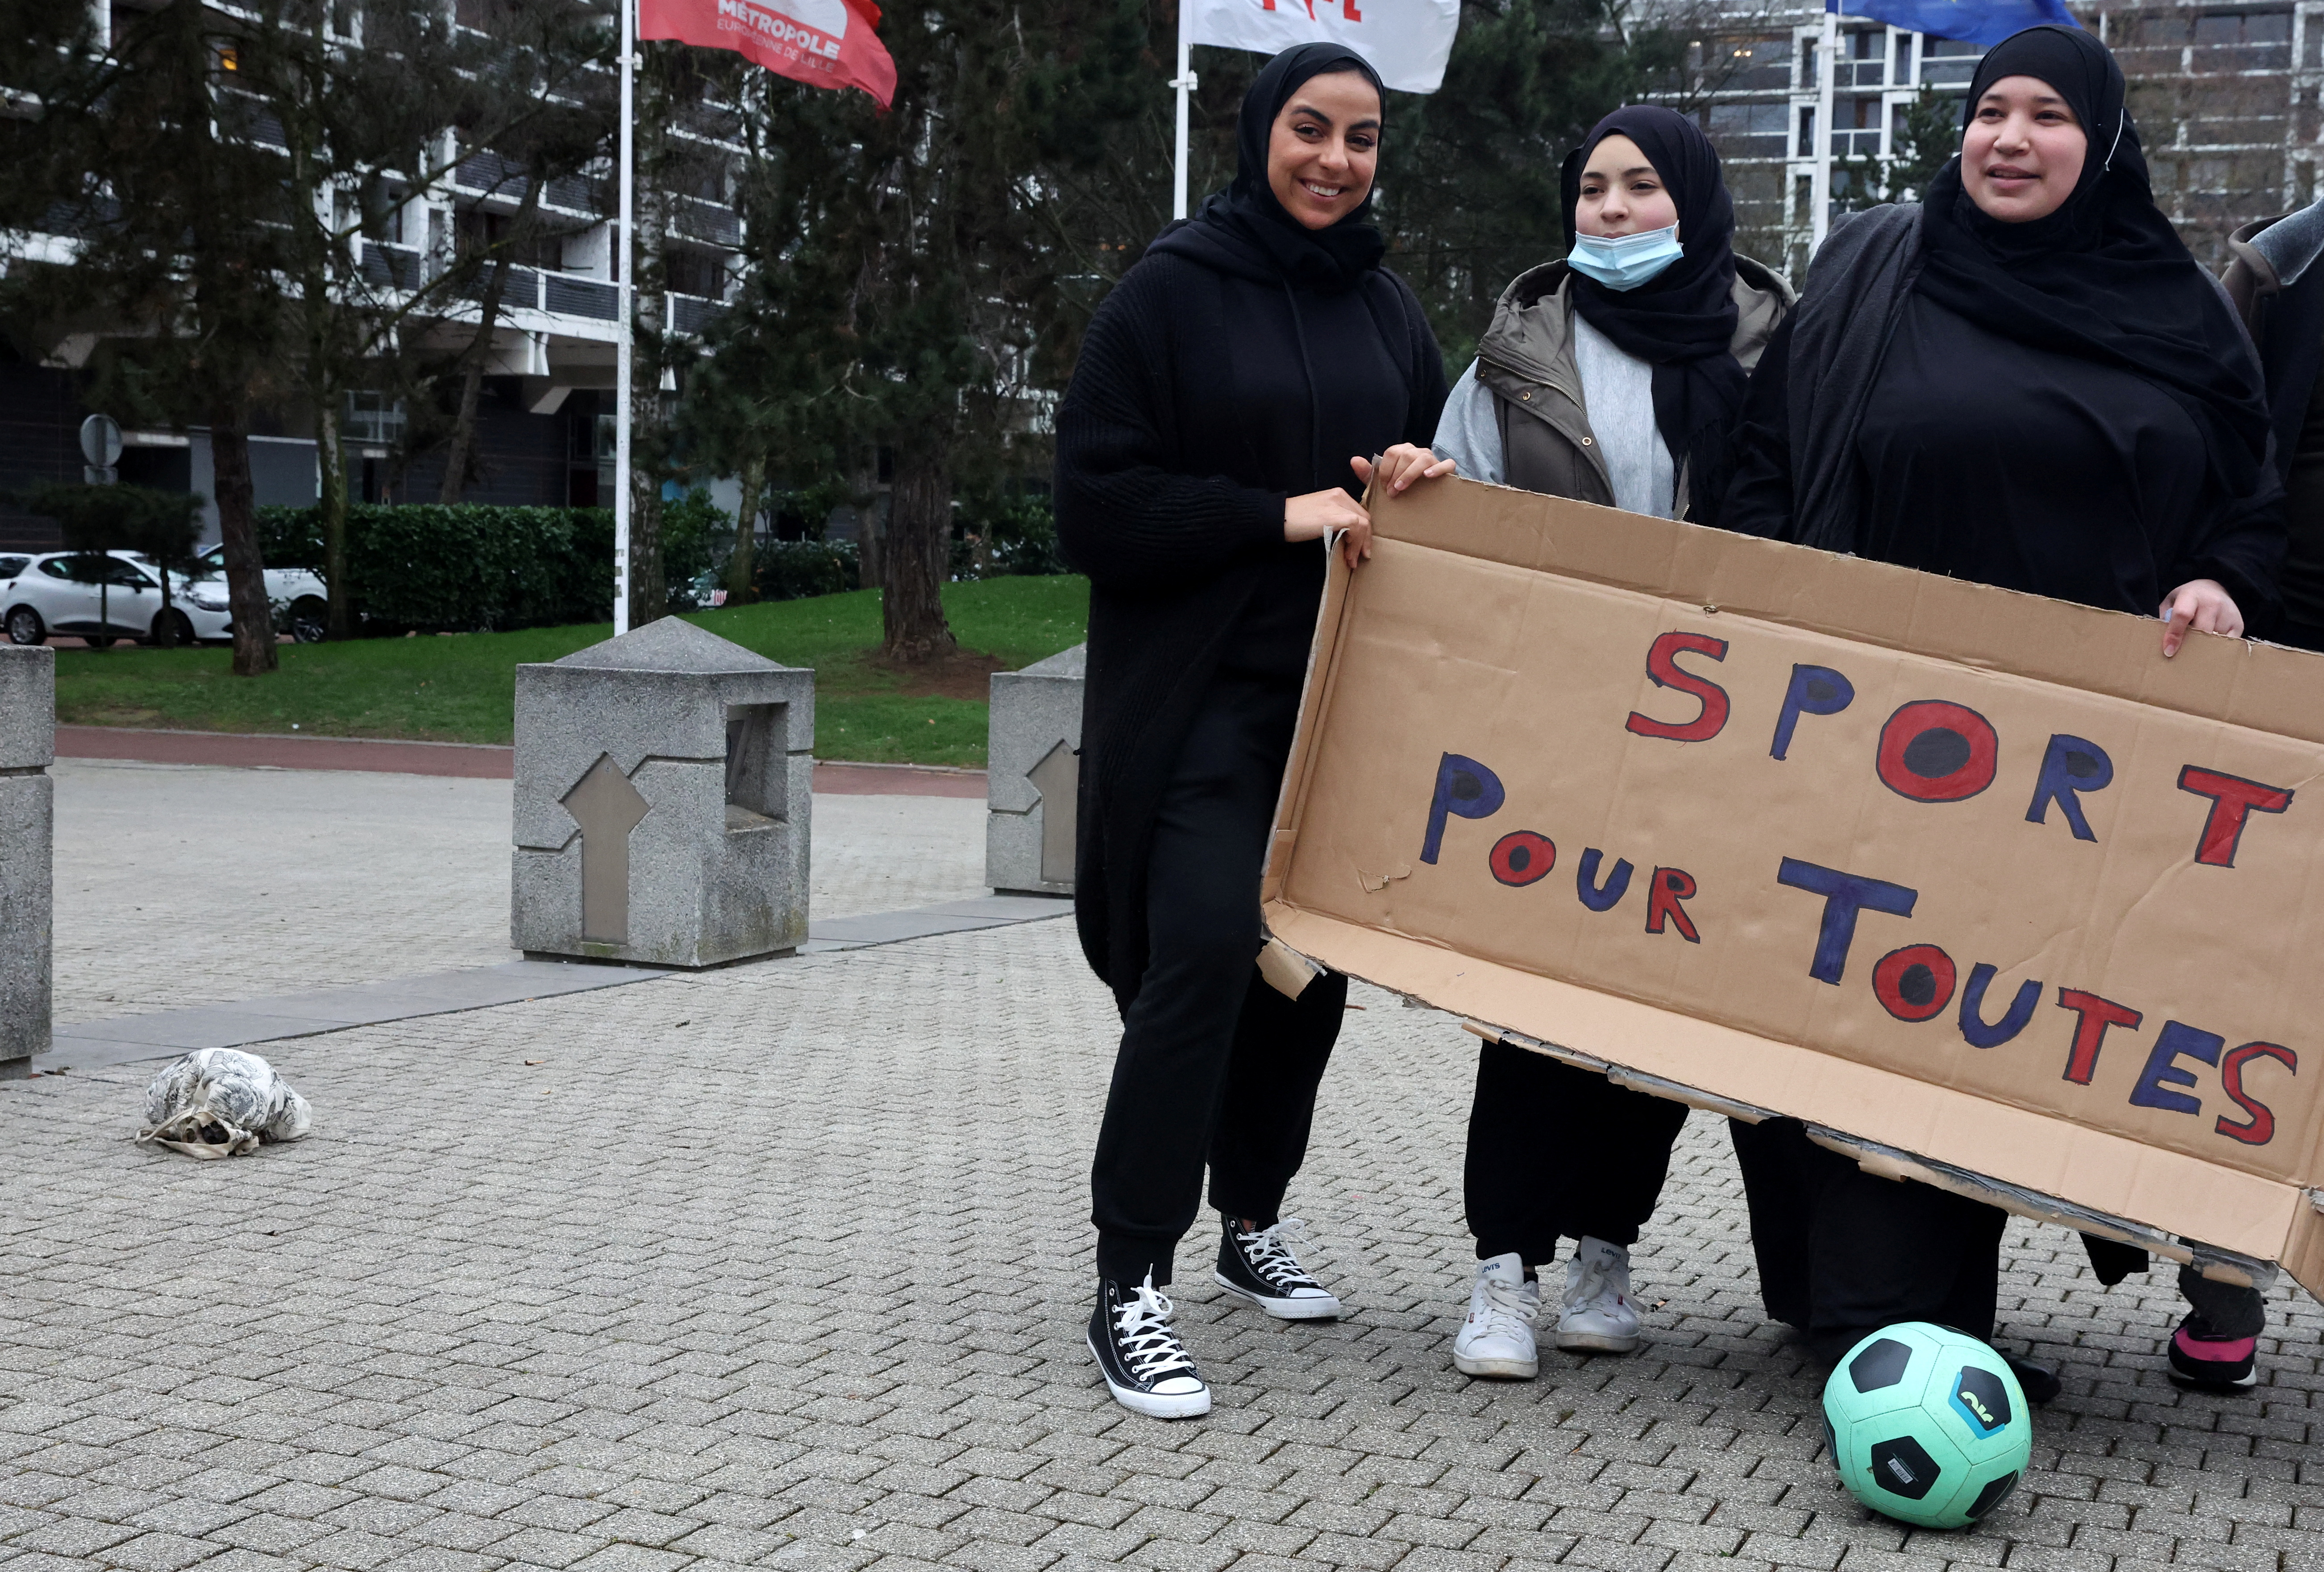 Supporters of Muslim women soccer players protest against French hijab ban in sports, in Lille